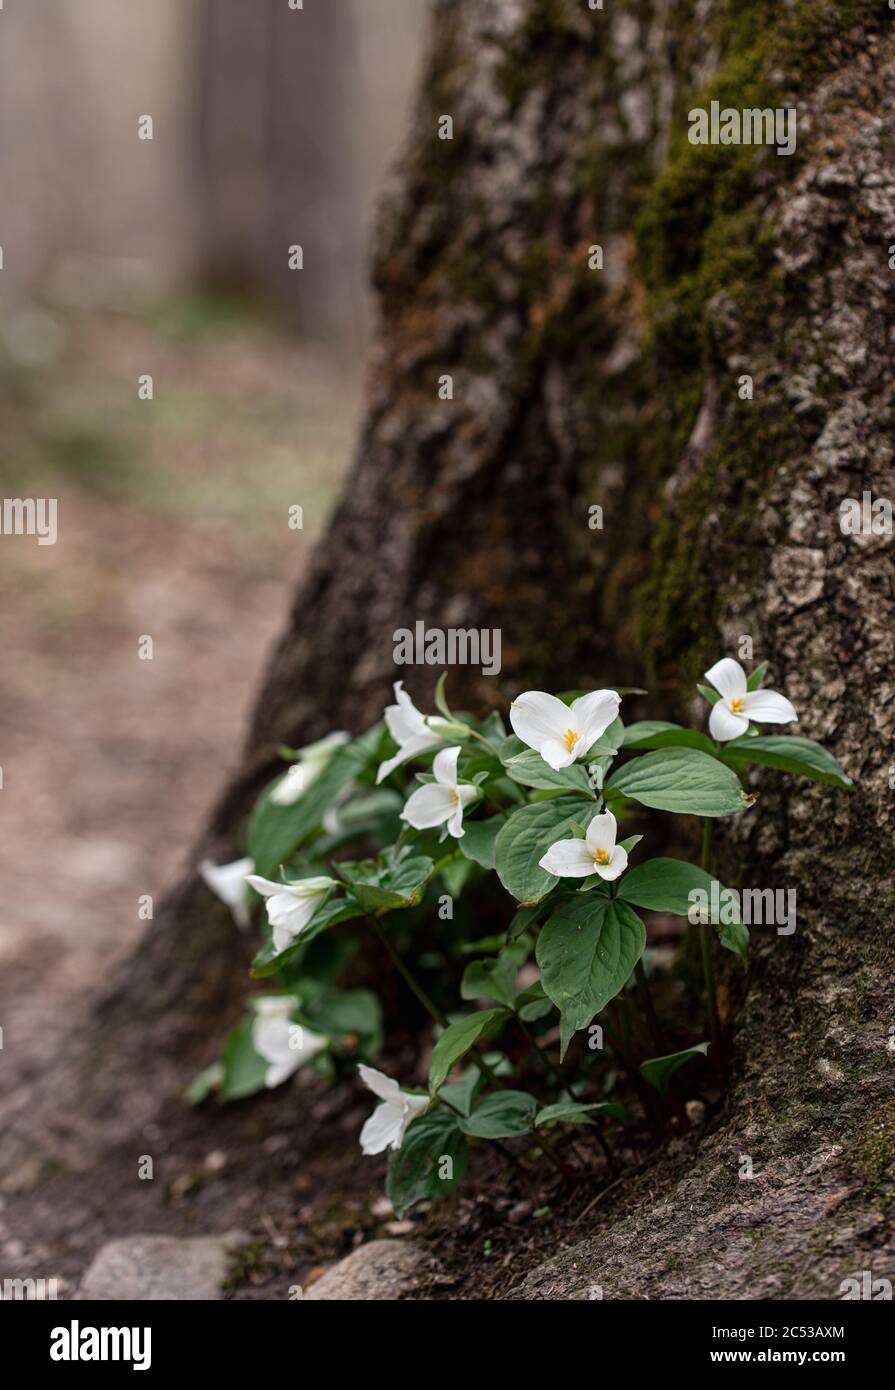 Cluster of trillium flowers blooming on the forest floor in Ontario. Stock Photo